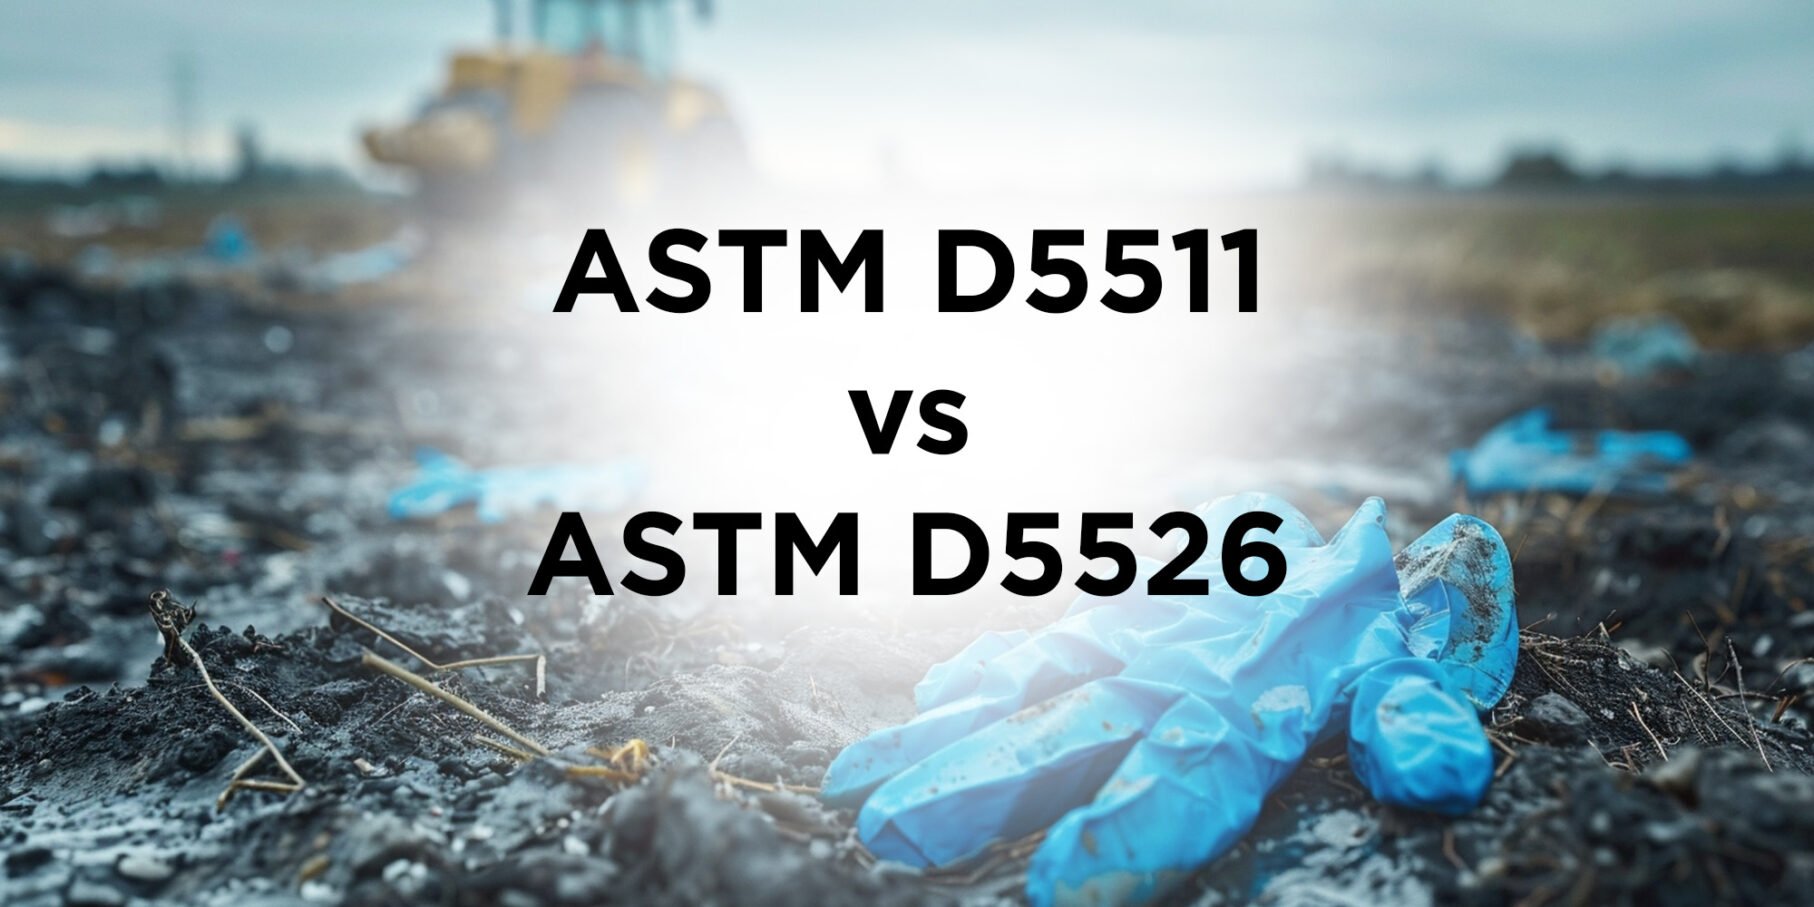 Image showing nitrile gloves on landfill with the text ASTM D5511 vs ASTM D5526 in front.